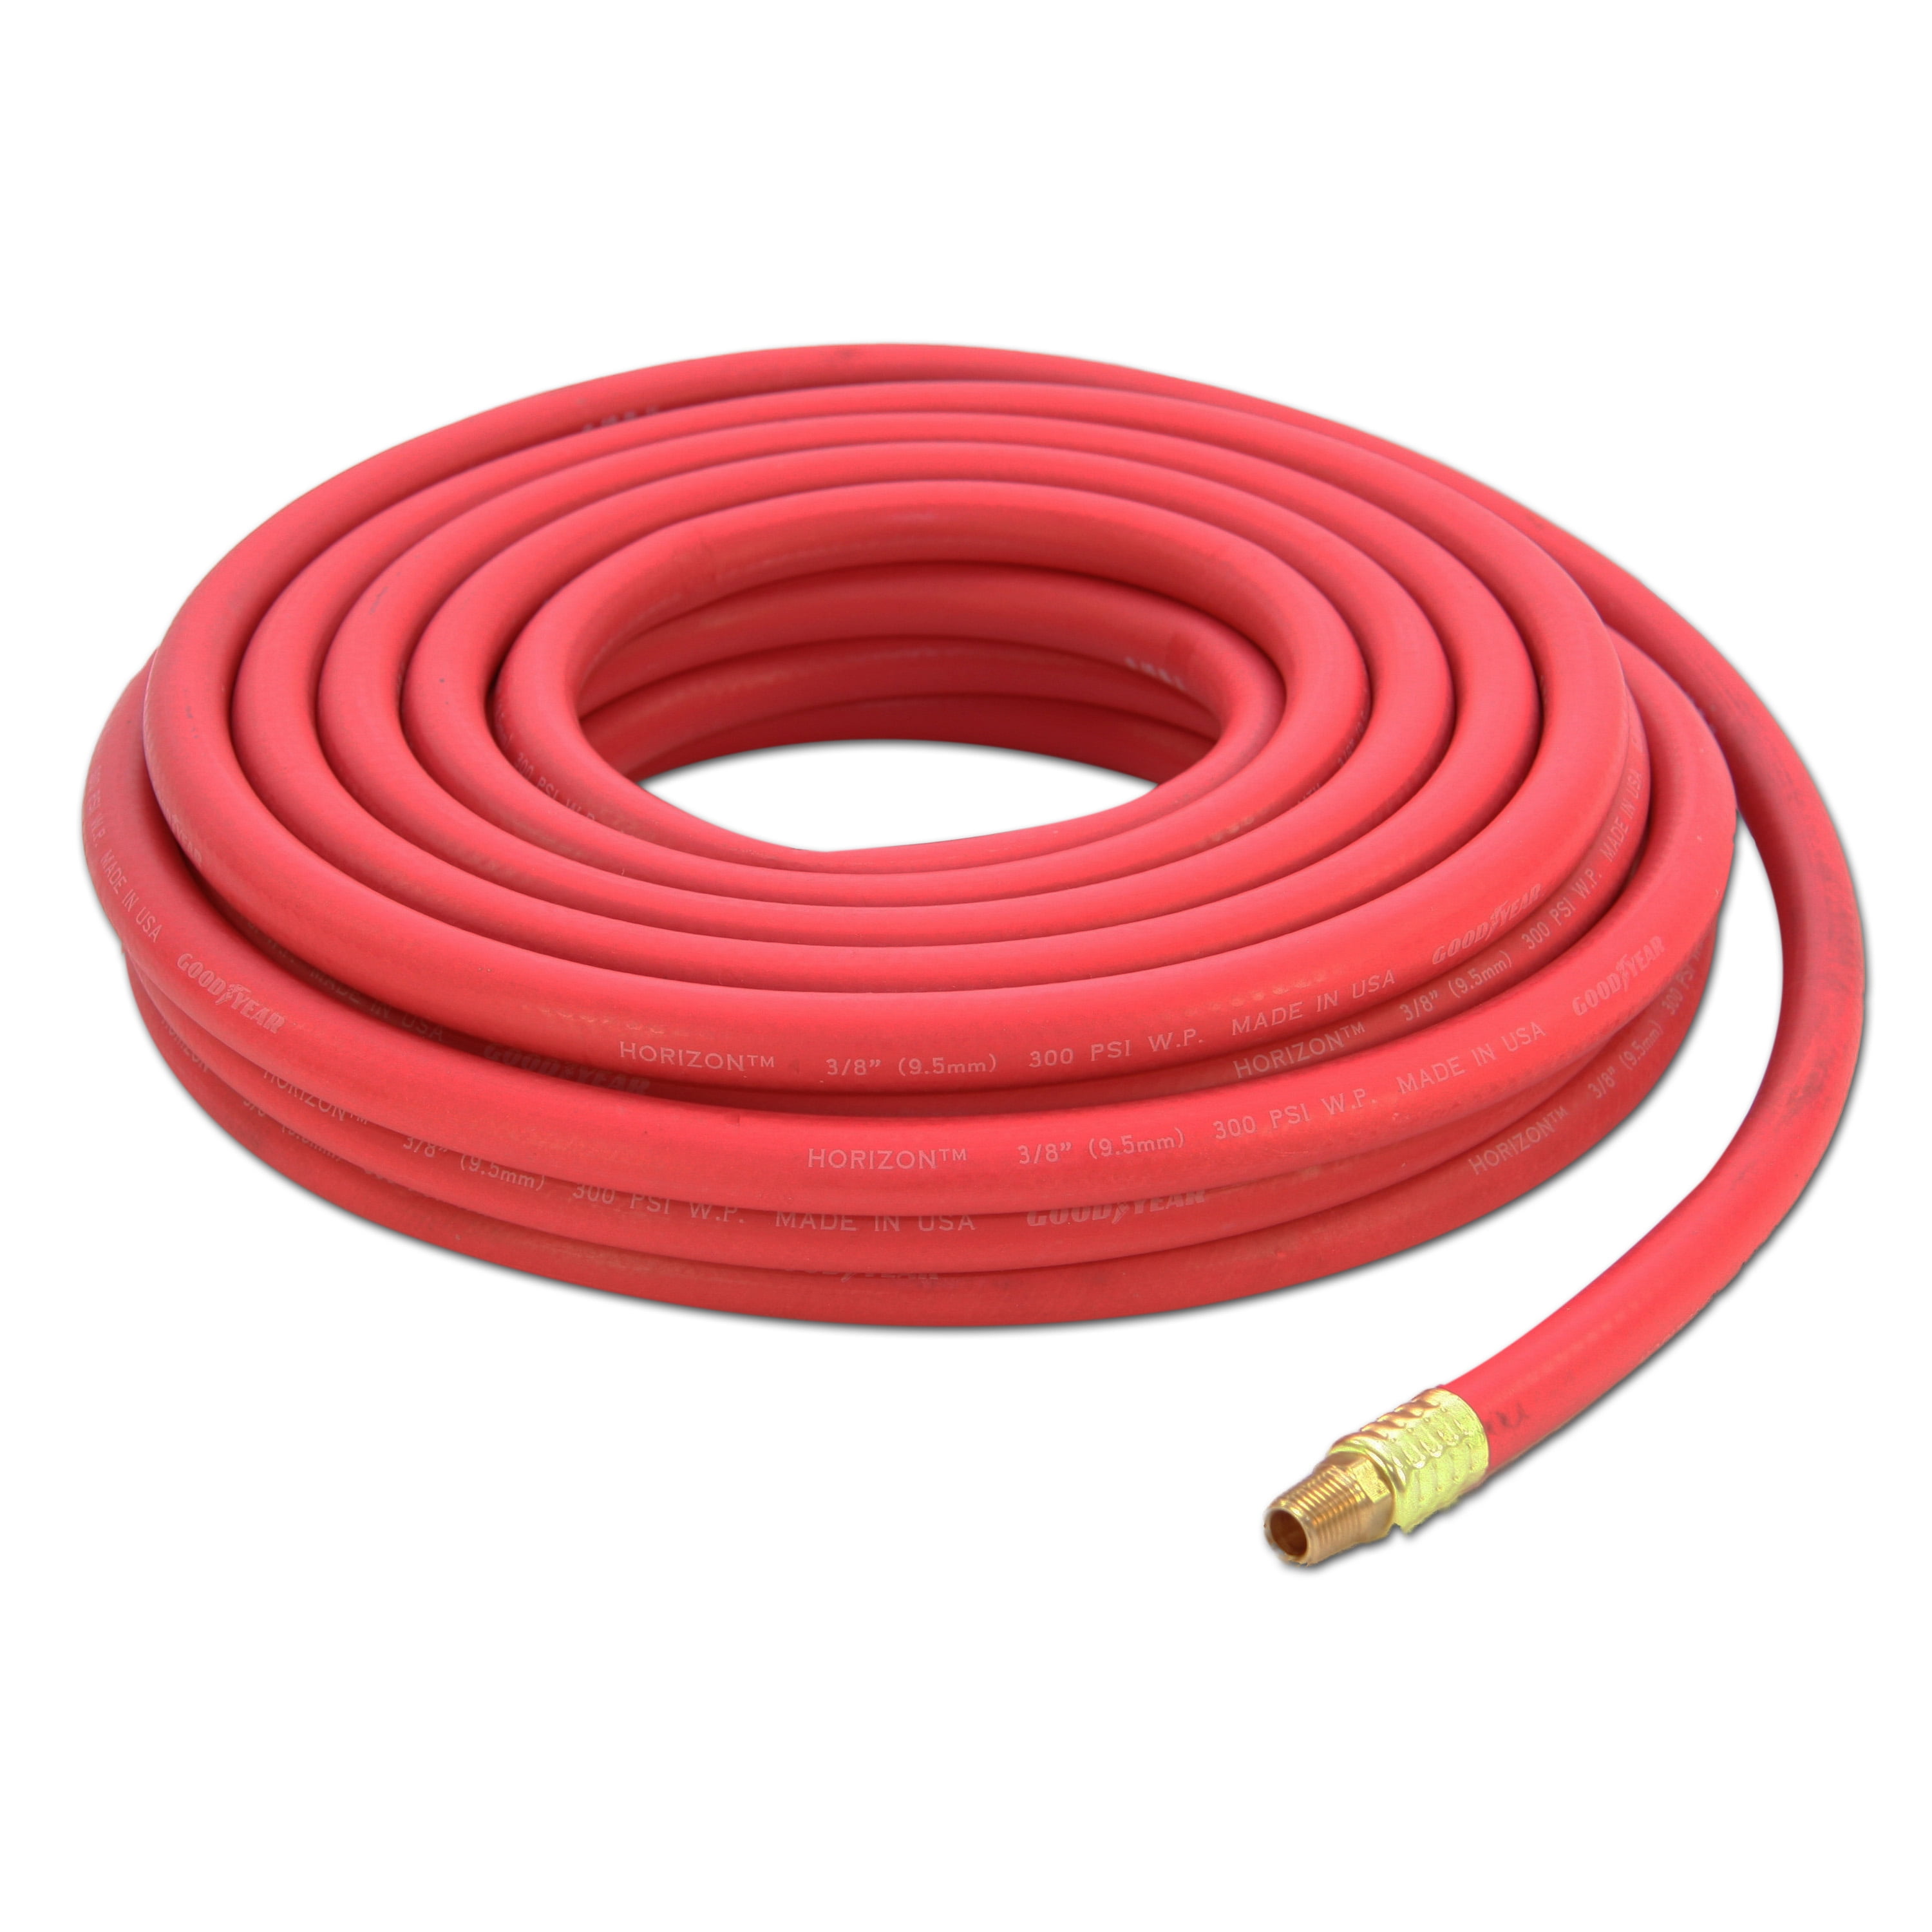 Flexible Rubber Fuel Line Hose for Cars Trucks & Small Engines 1/4" x 25' 